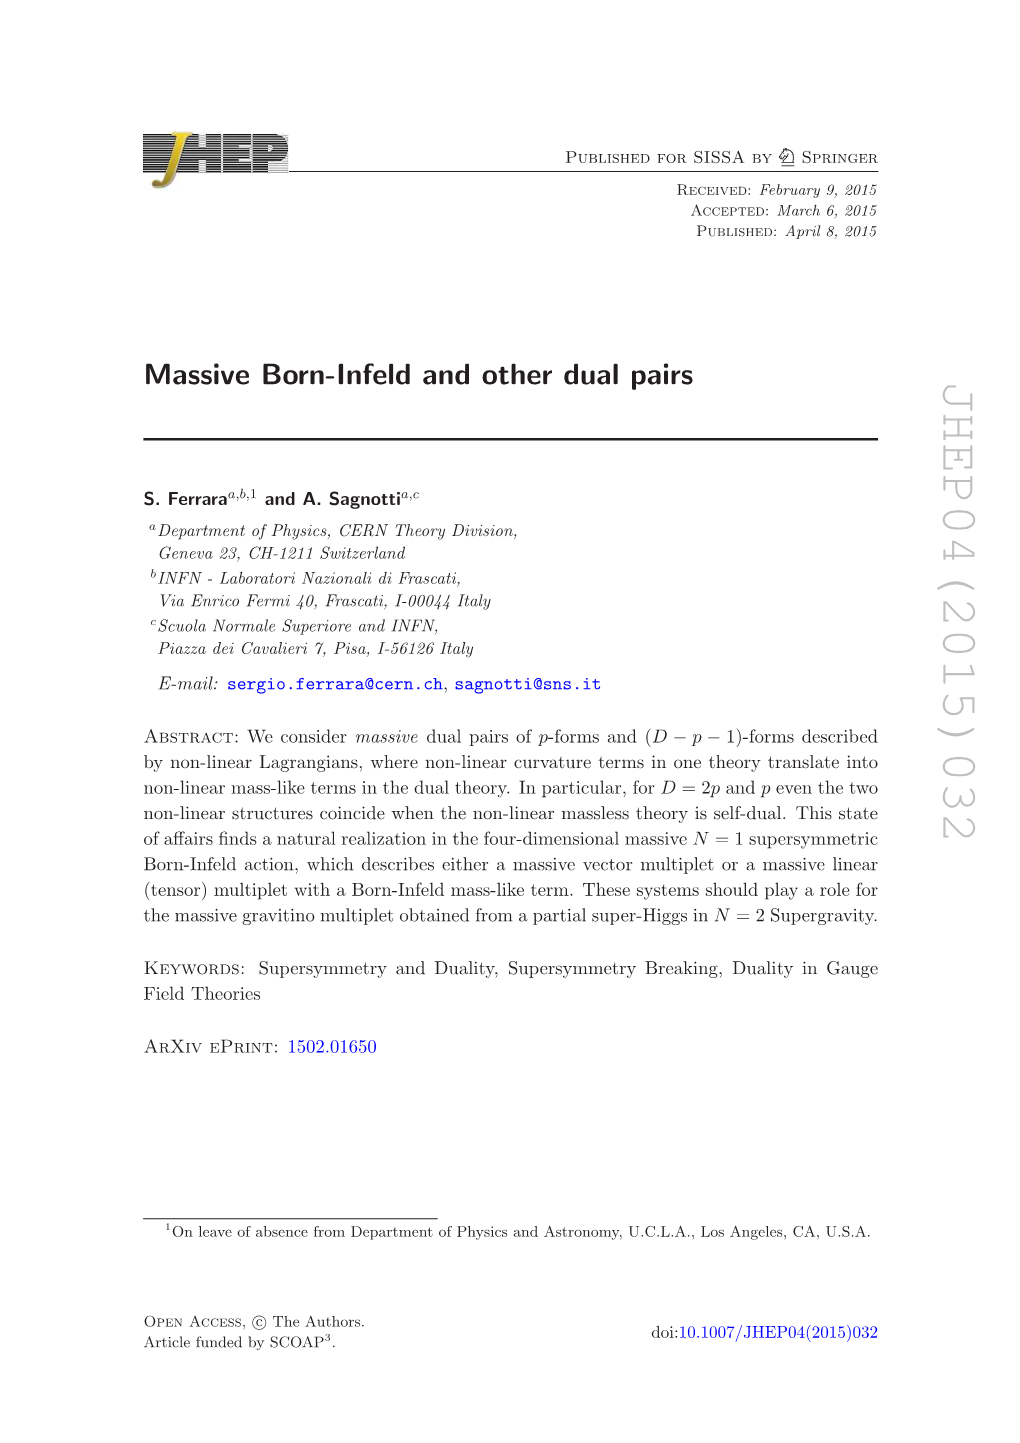 Massive Born-Infeld and Other Dual Pairs Abstract: S